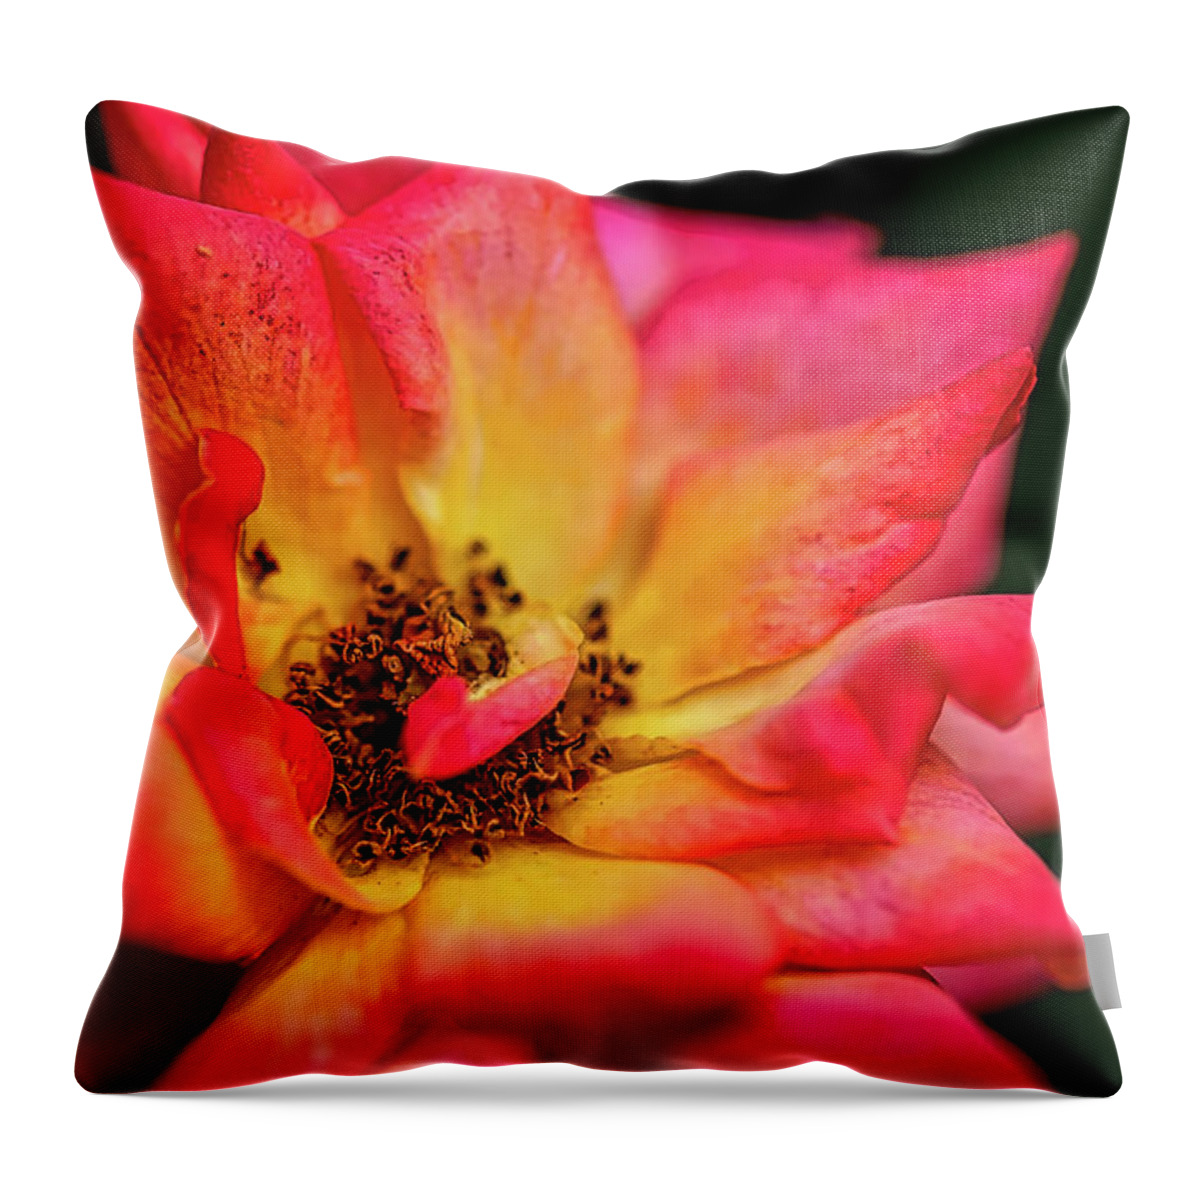 Rose Throw Pillow featuring the photograph Rose Corolla by Richard Gregurich